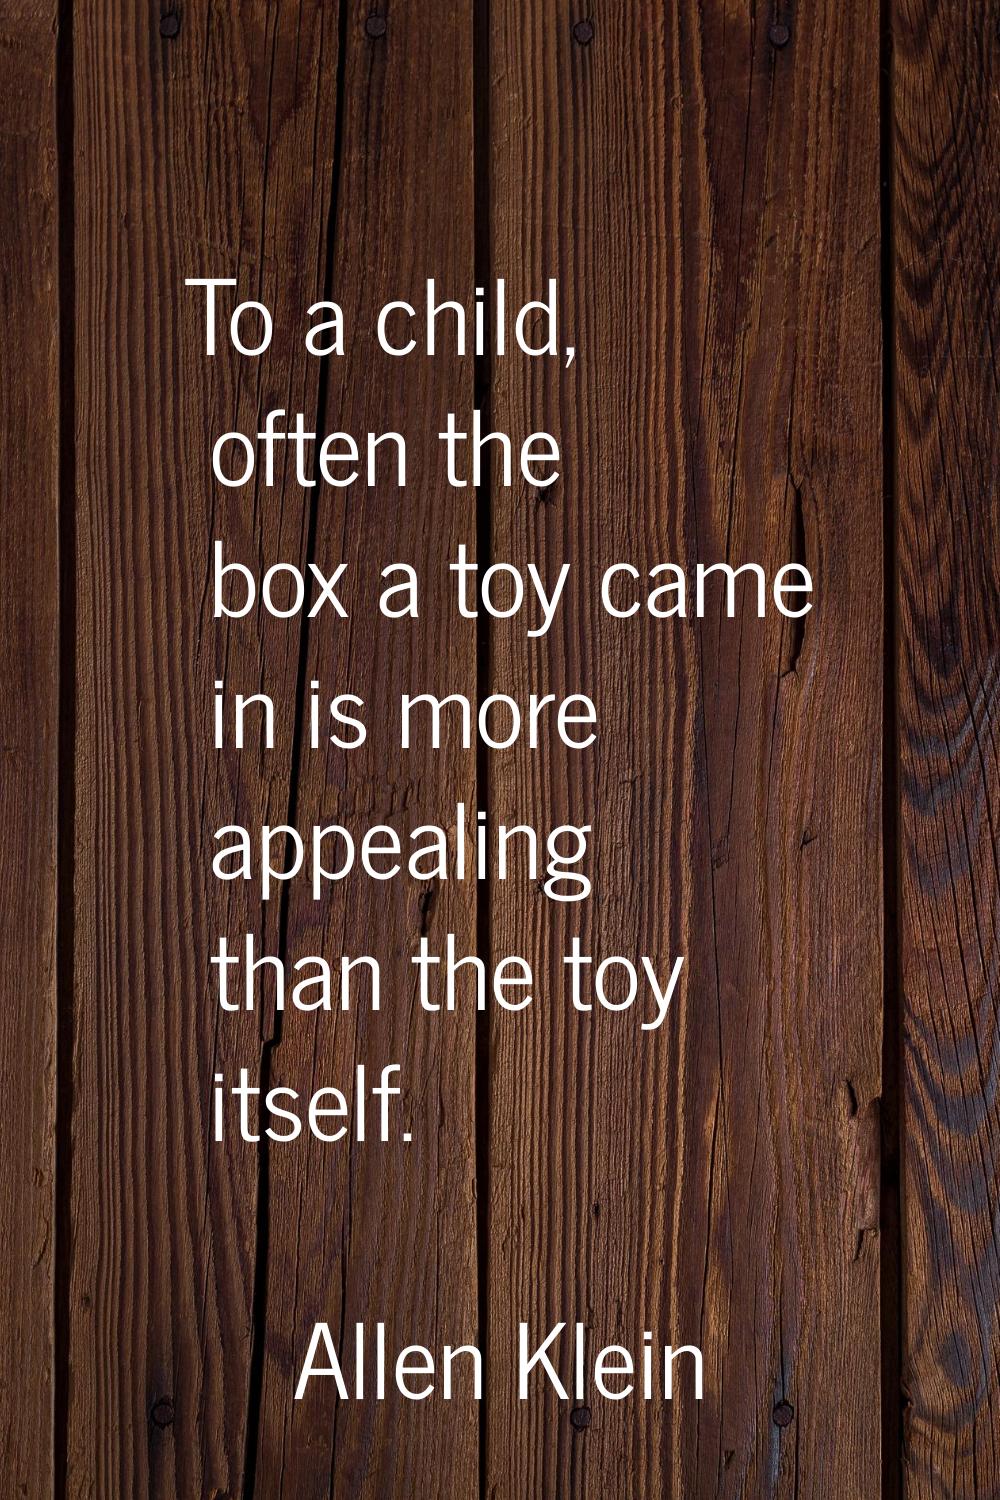 To a child, often the box a toy came in is more appealing than the toy itself.